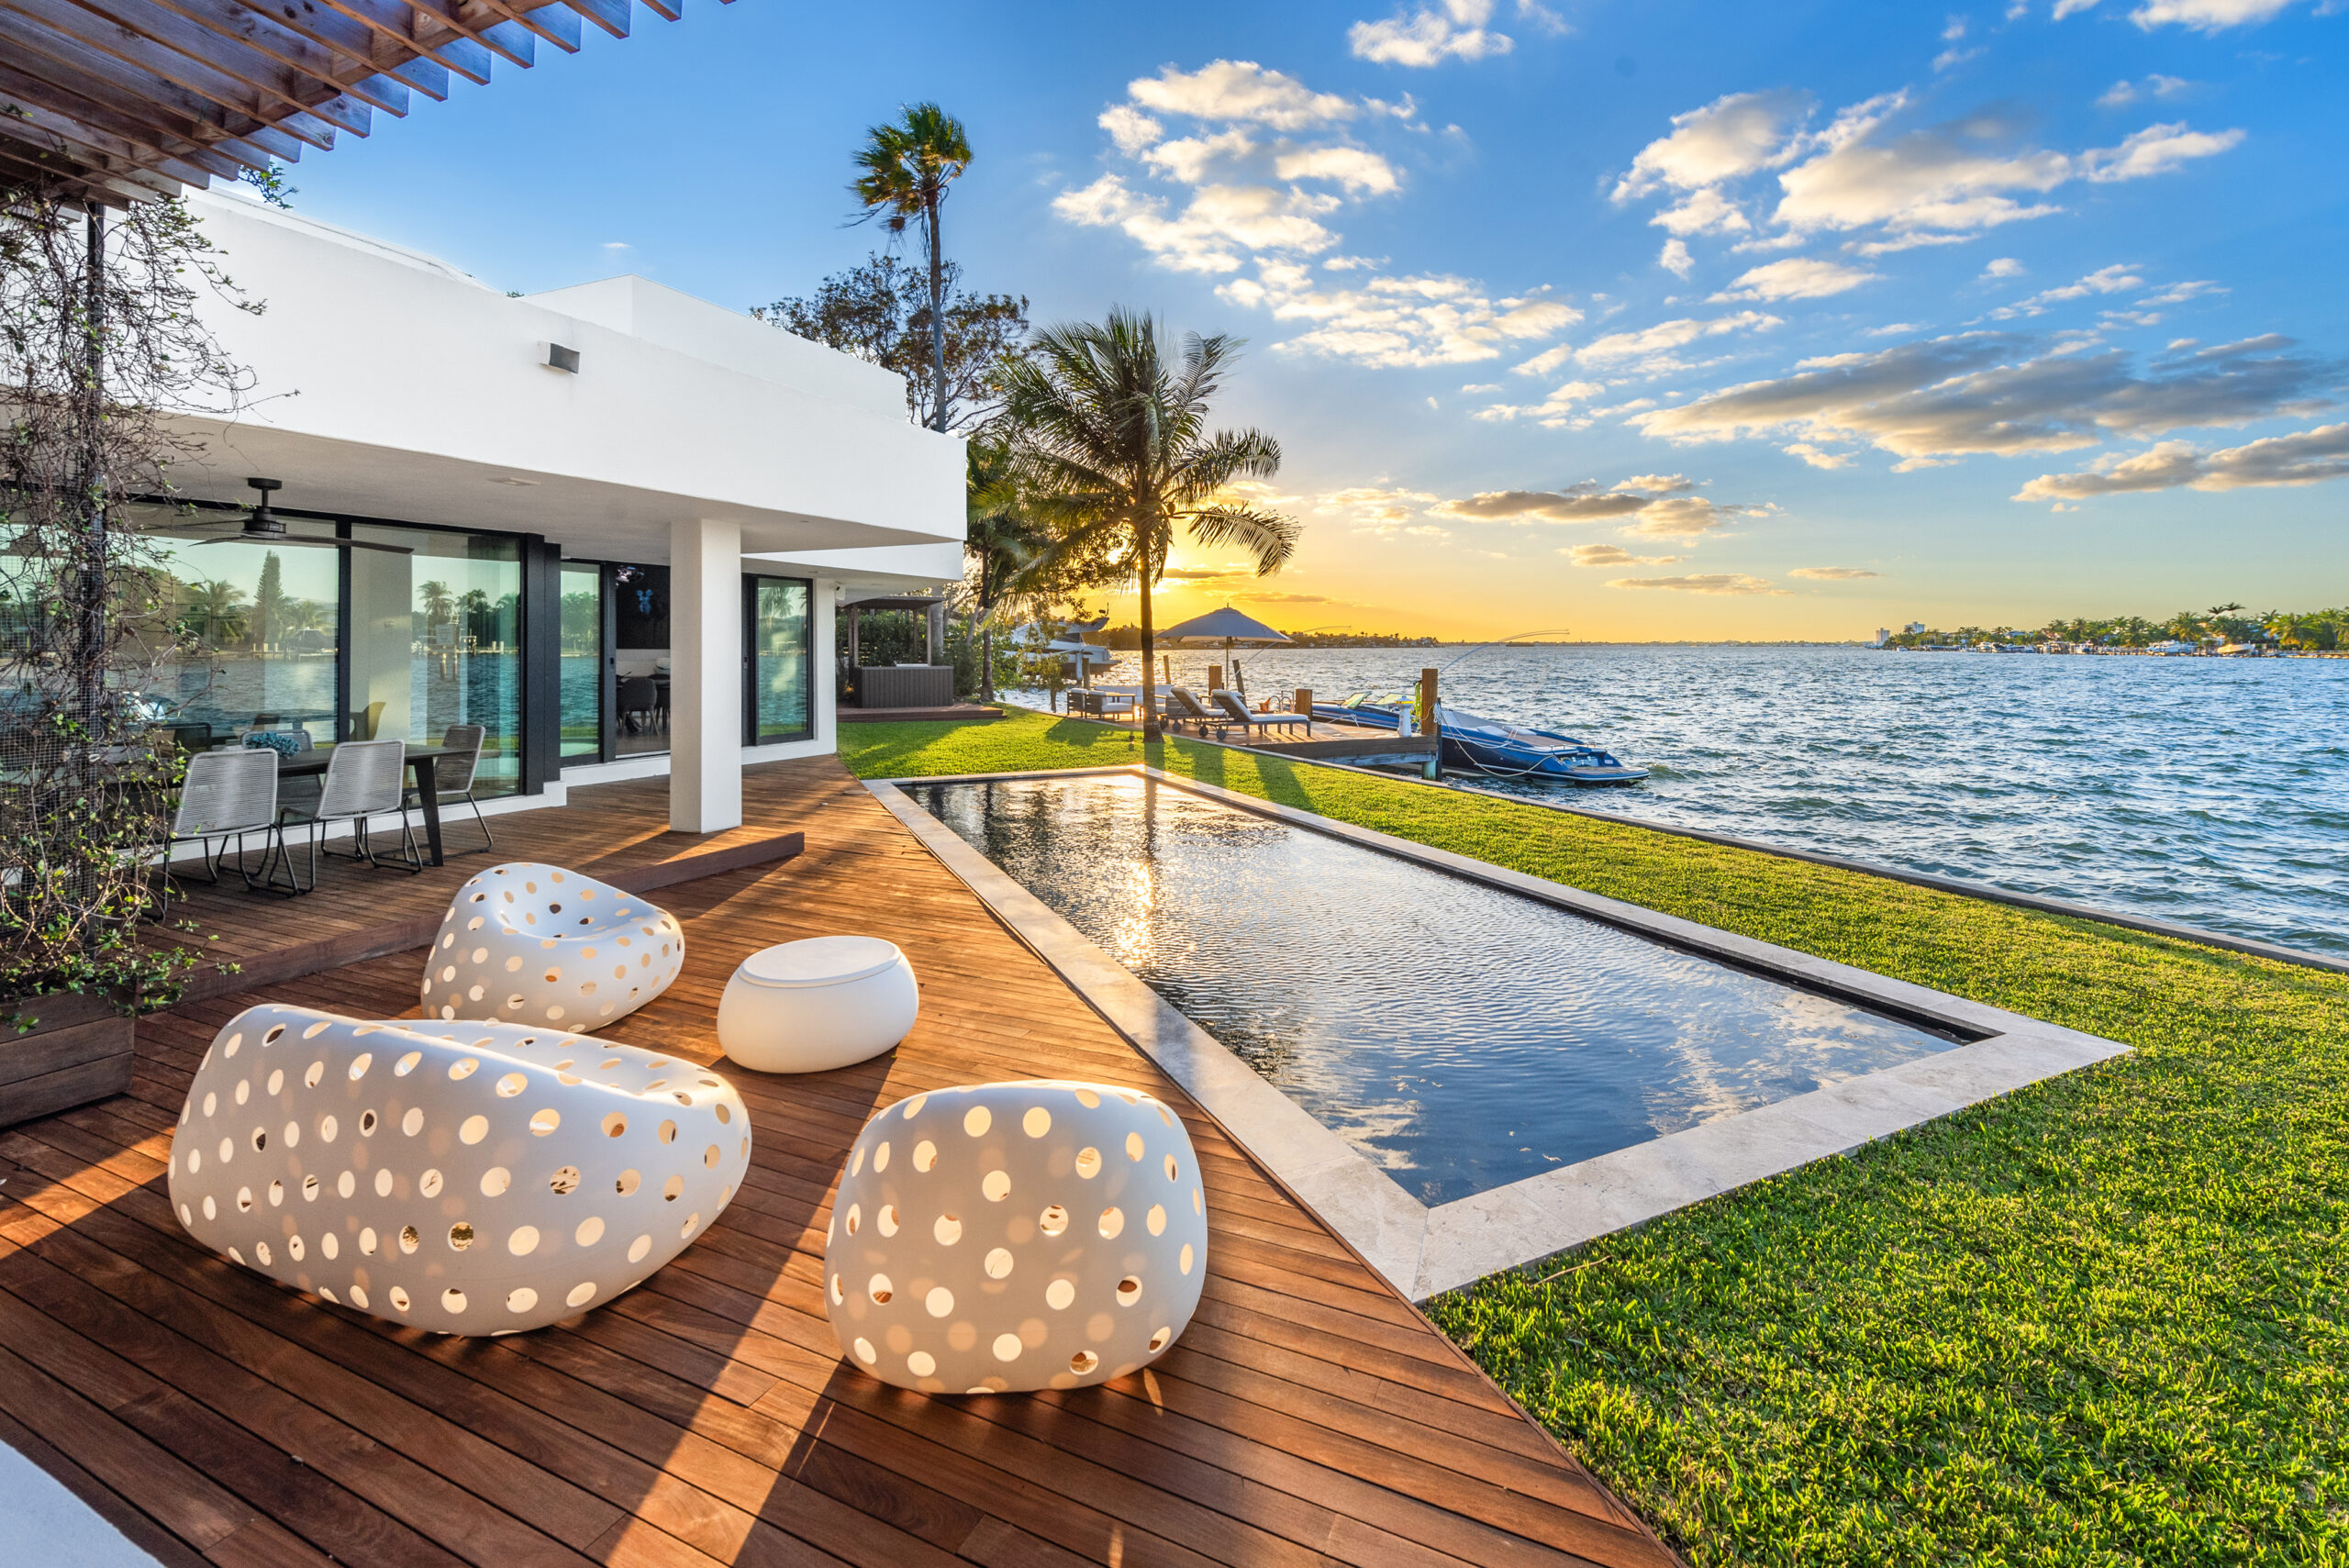 Our $18M Miami Beach Listing in Fancy Pants Homes